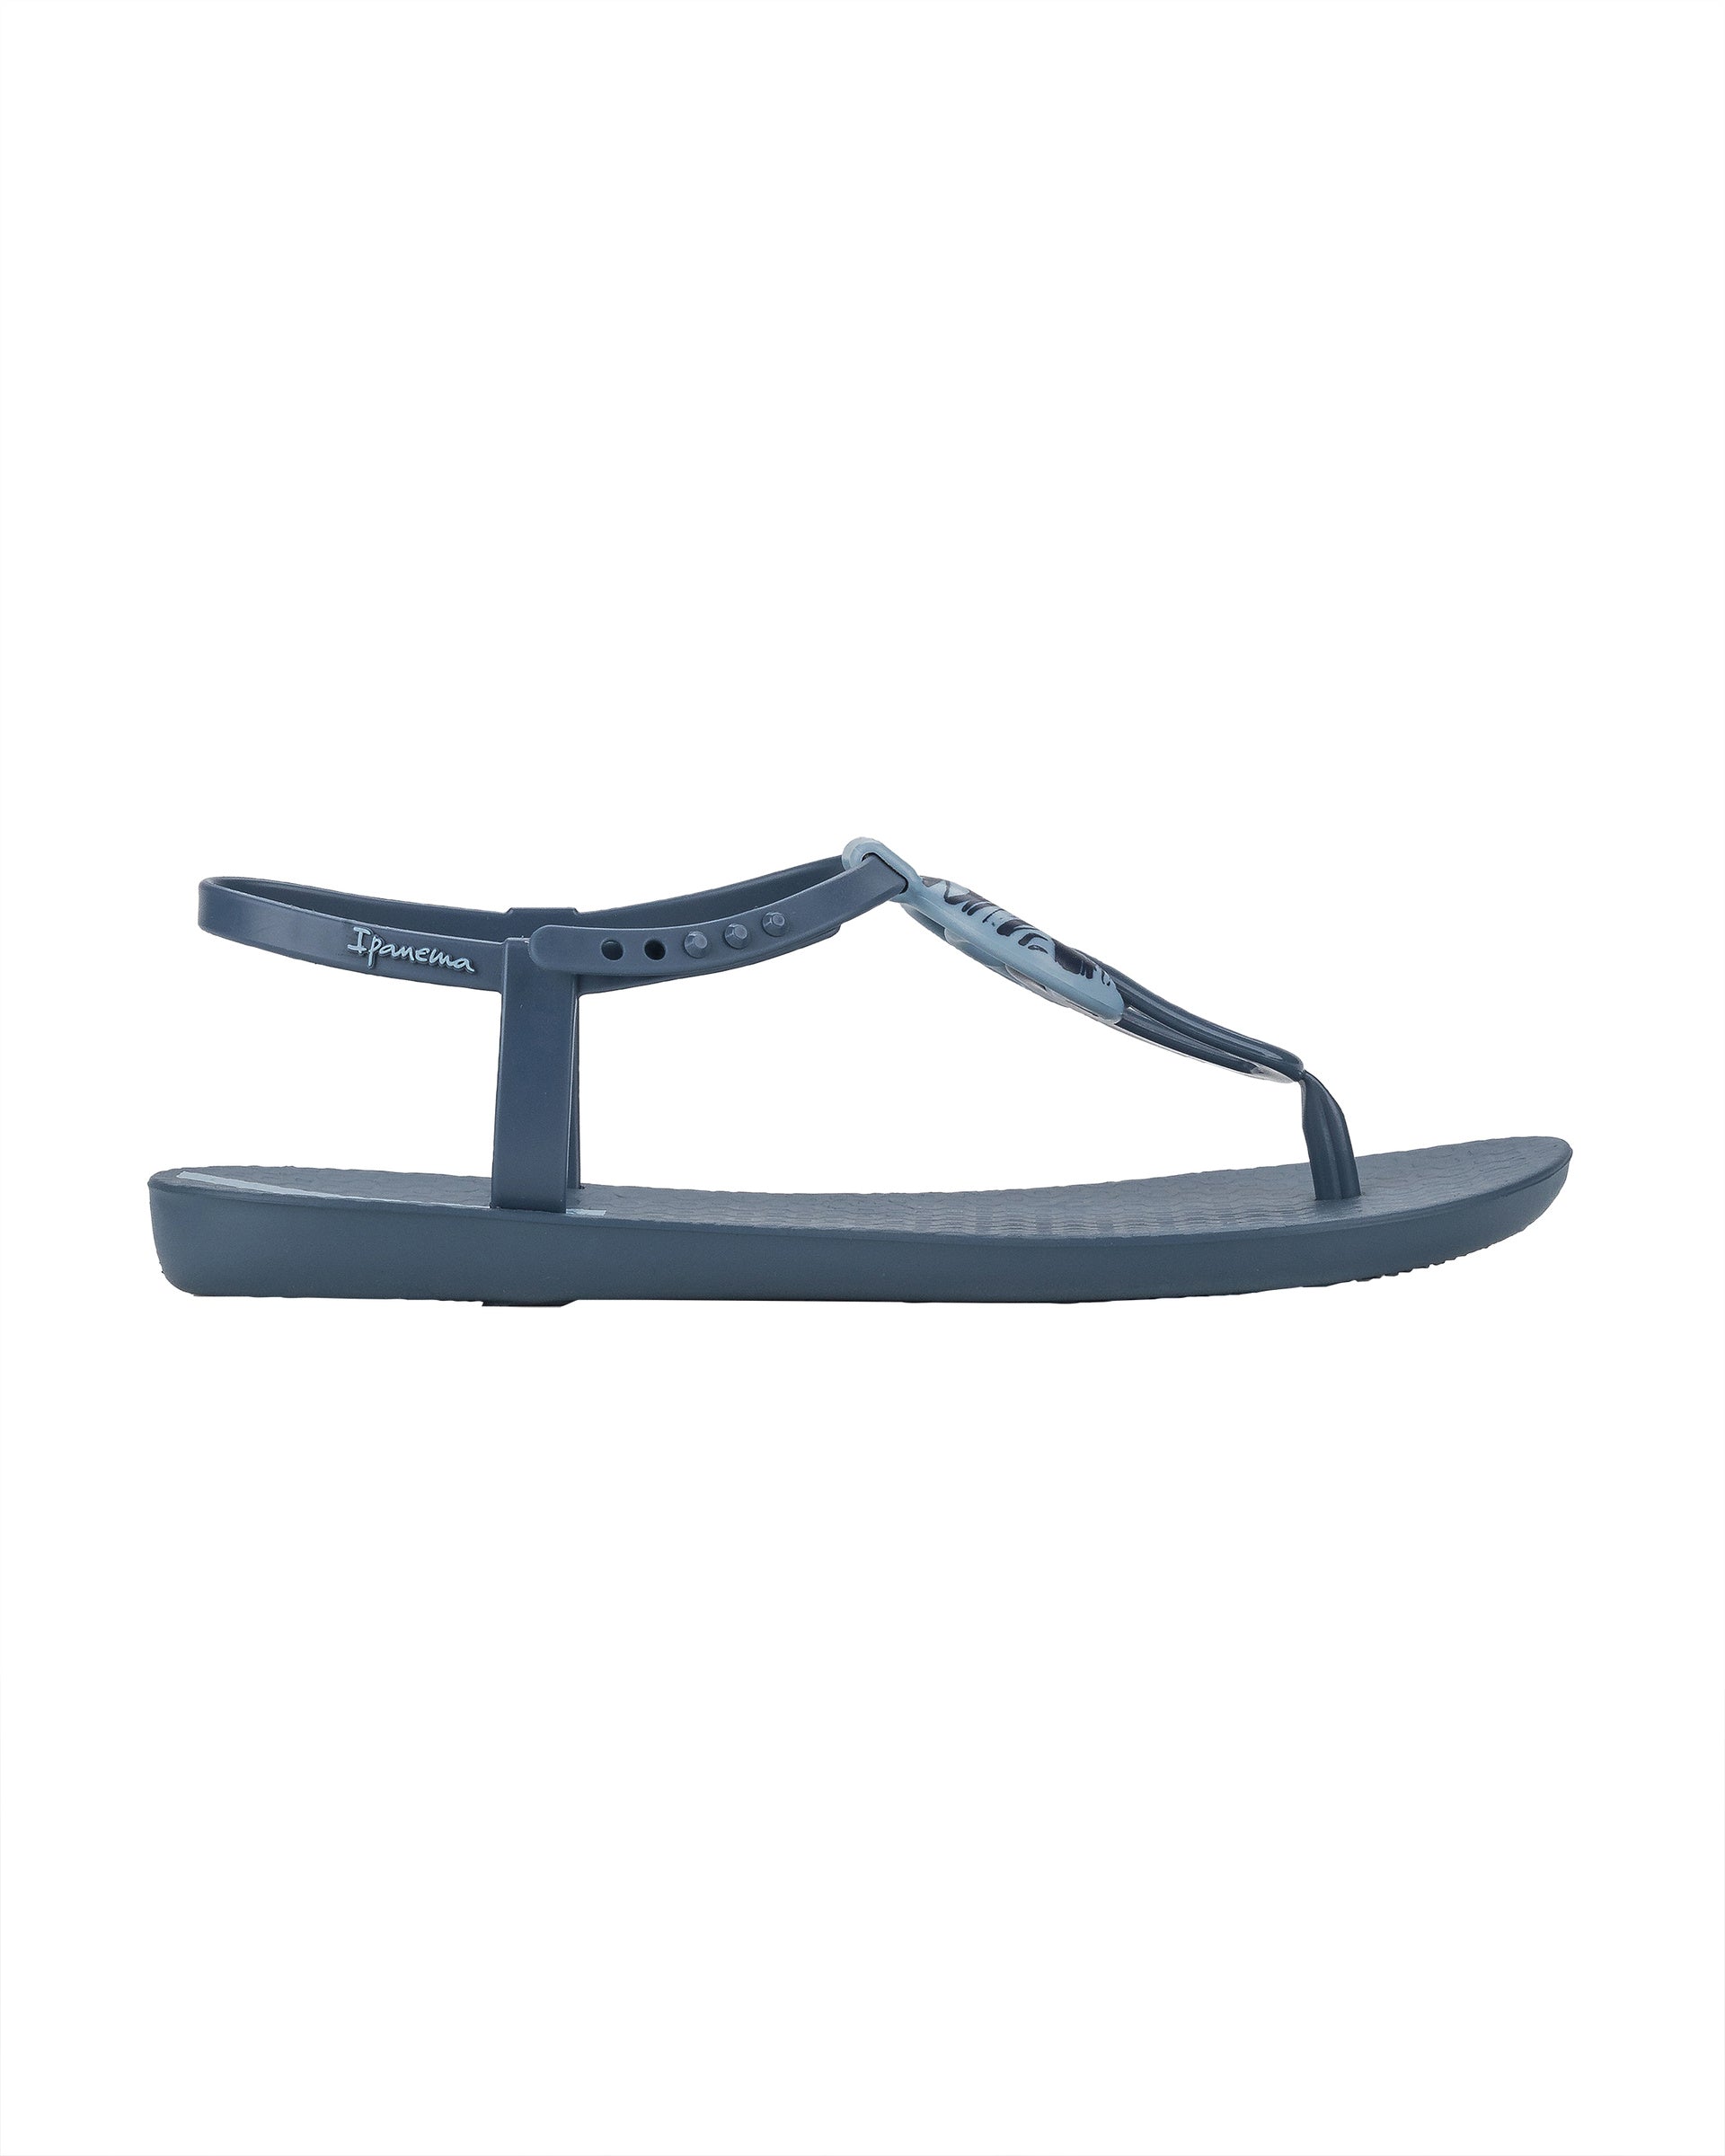 Outer side view of a blue Ipanema Class Marble women's t-strap sandal.